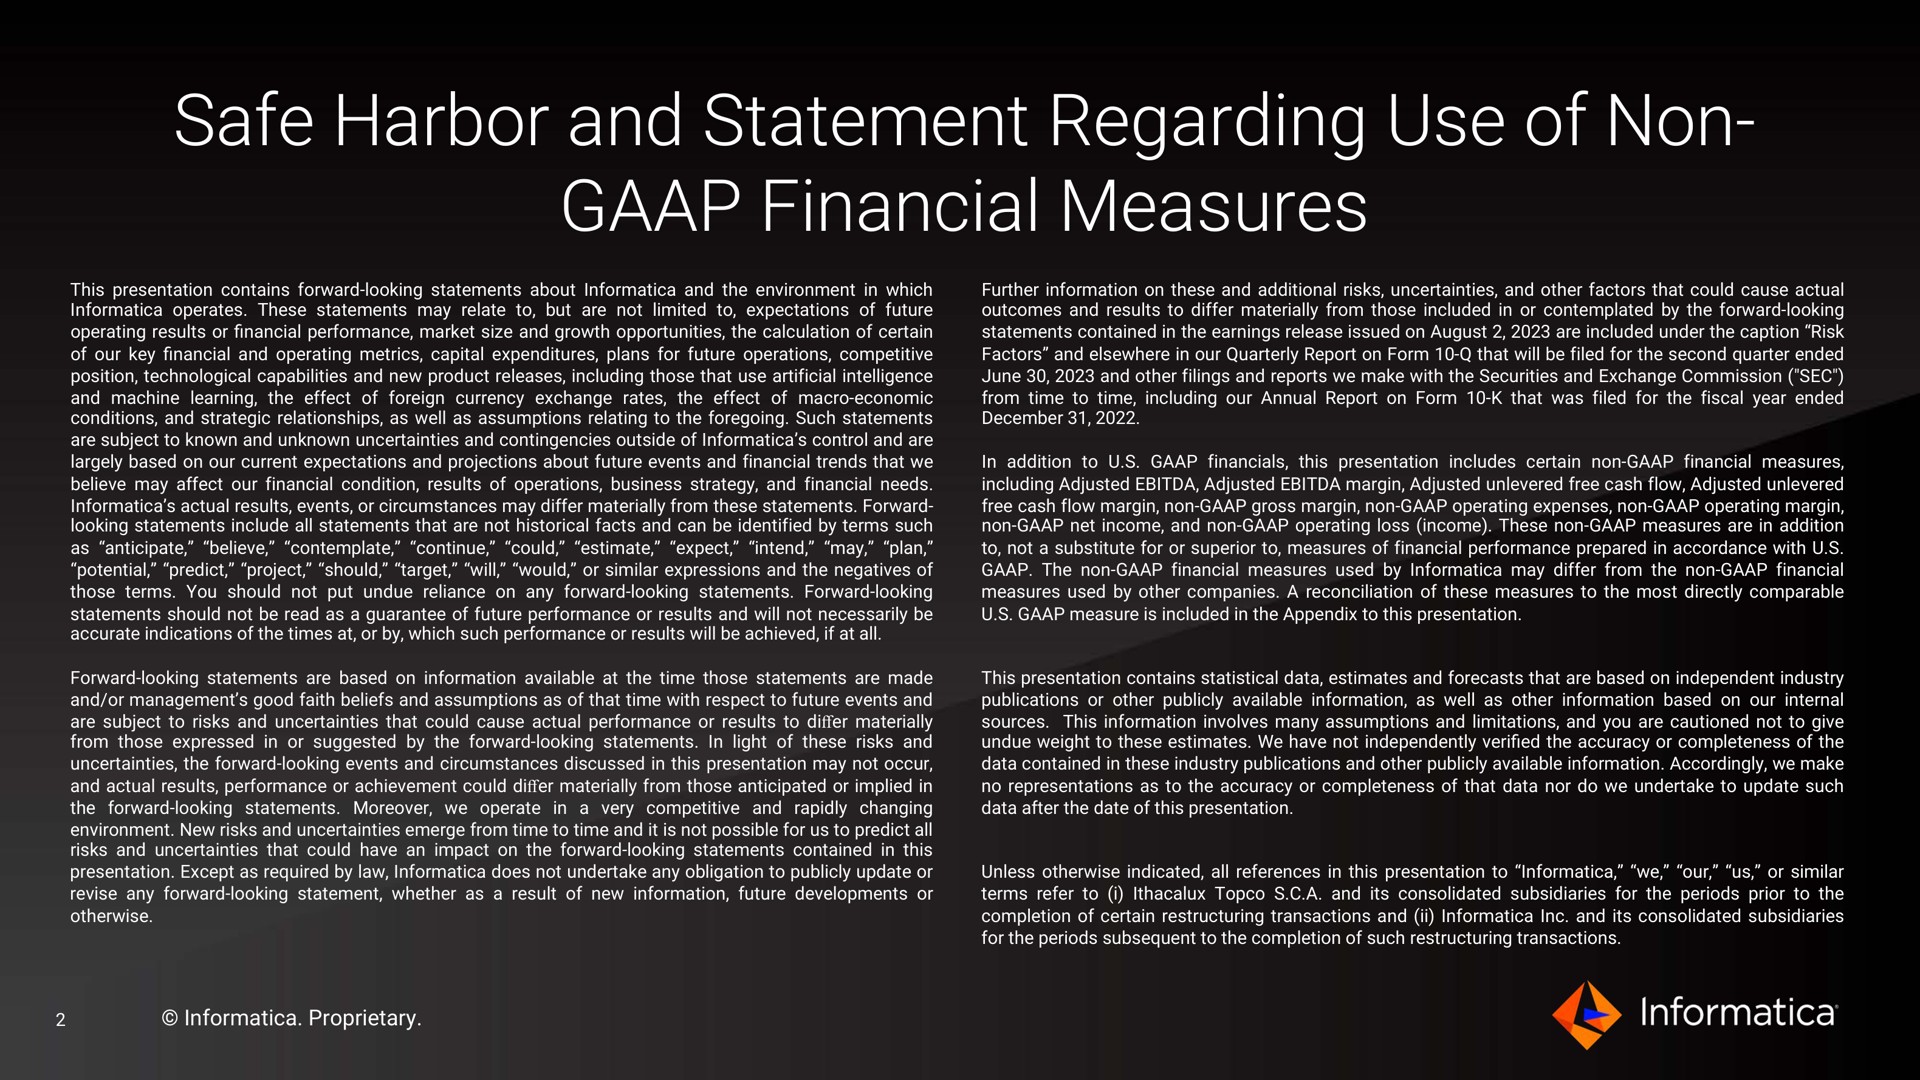 safe harbor and statement regarding use of non financial measures | Informatica